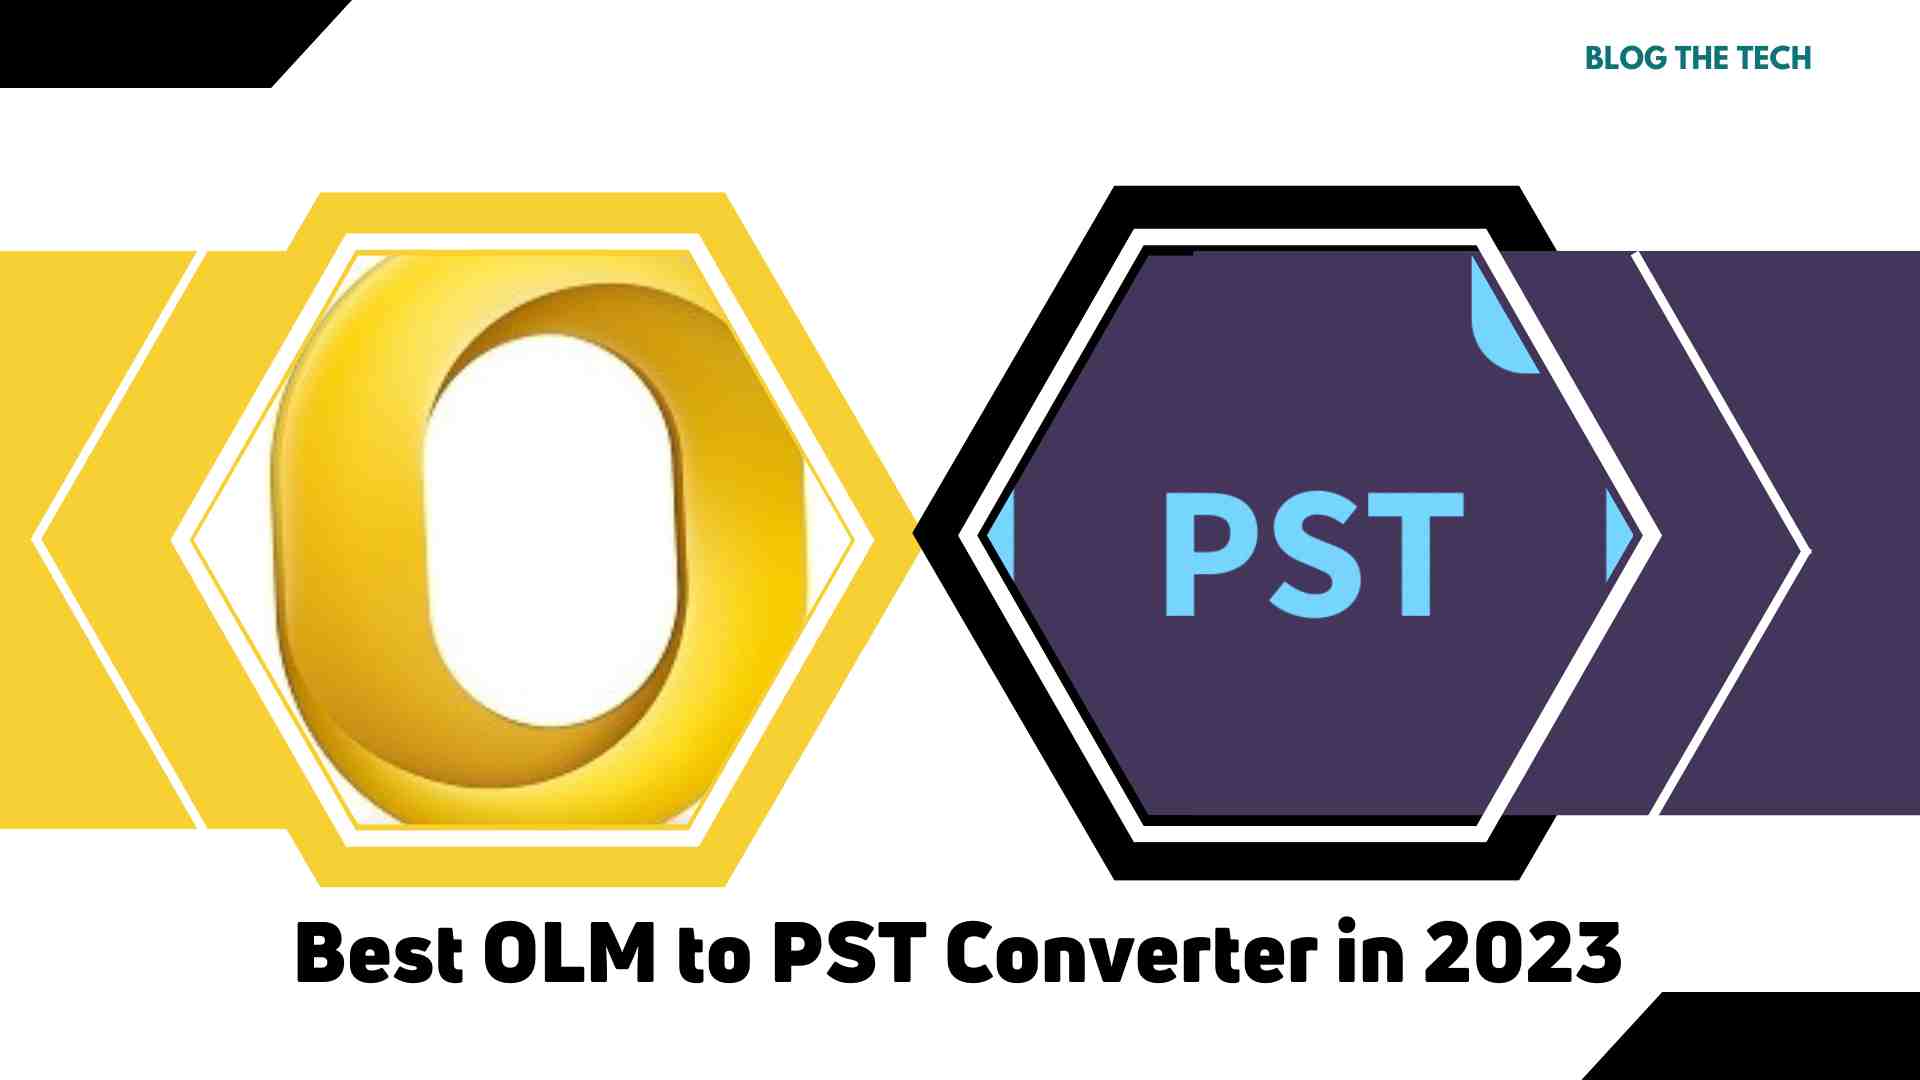 Best OLM to PST Converter in 2023